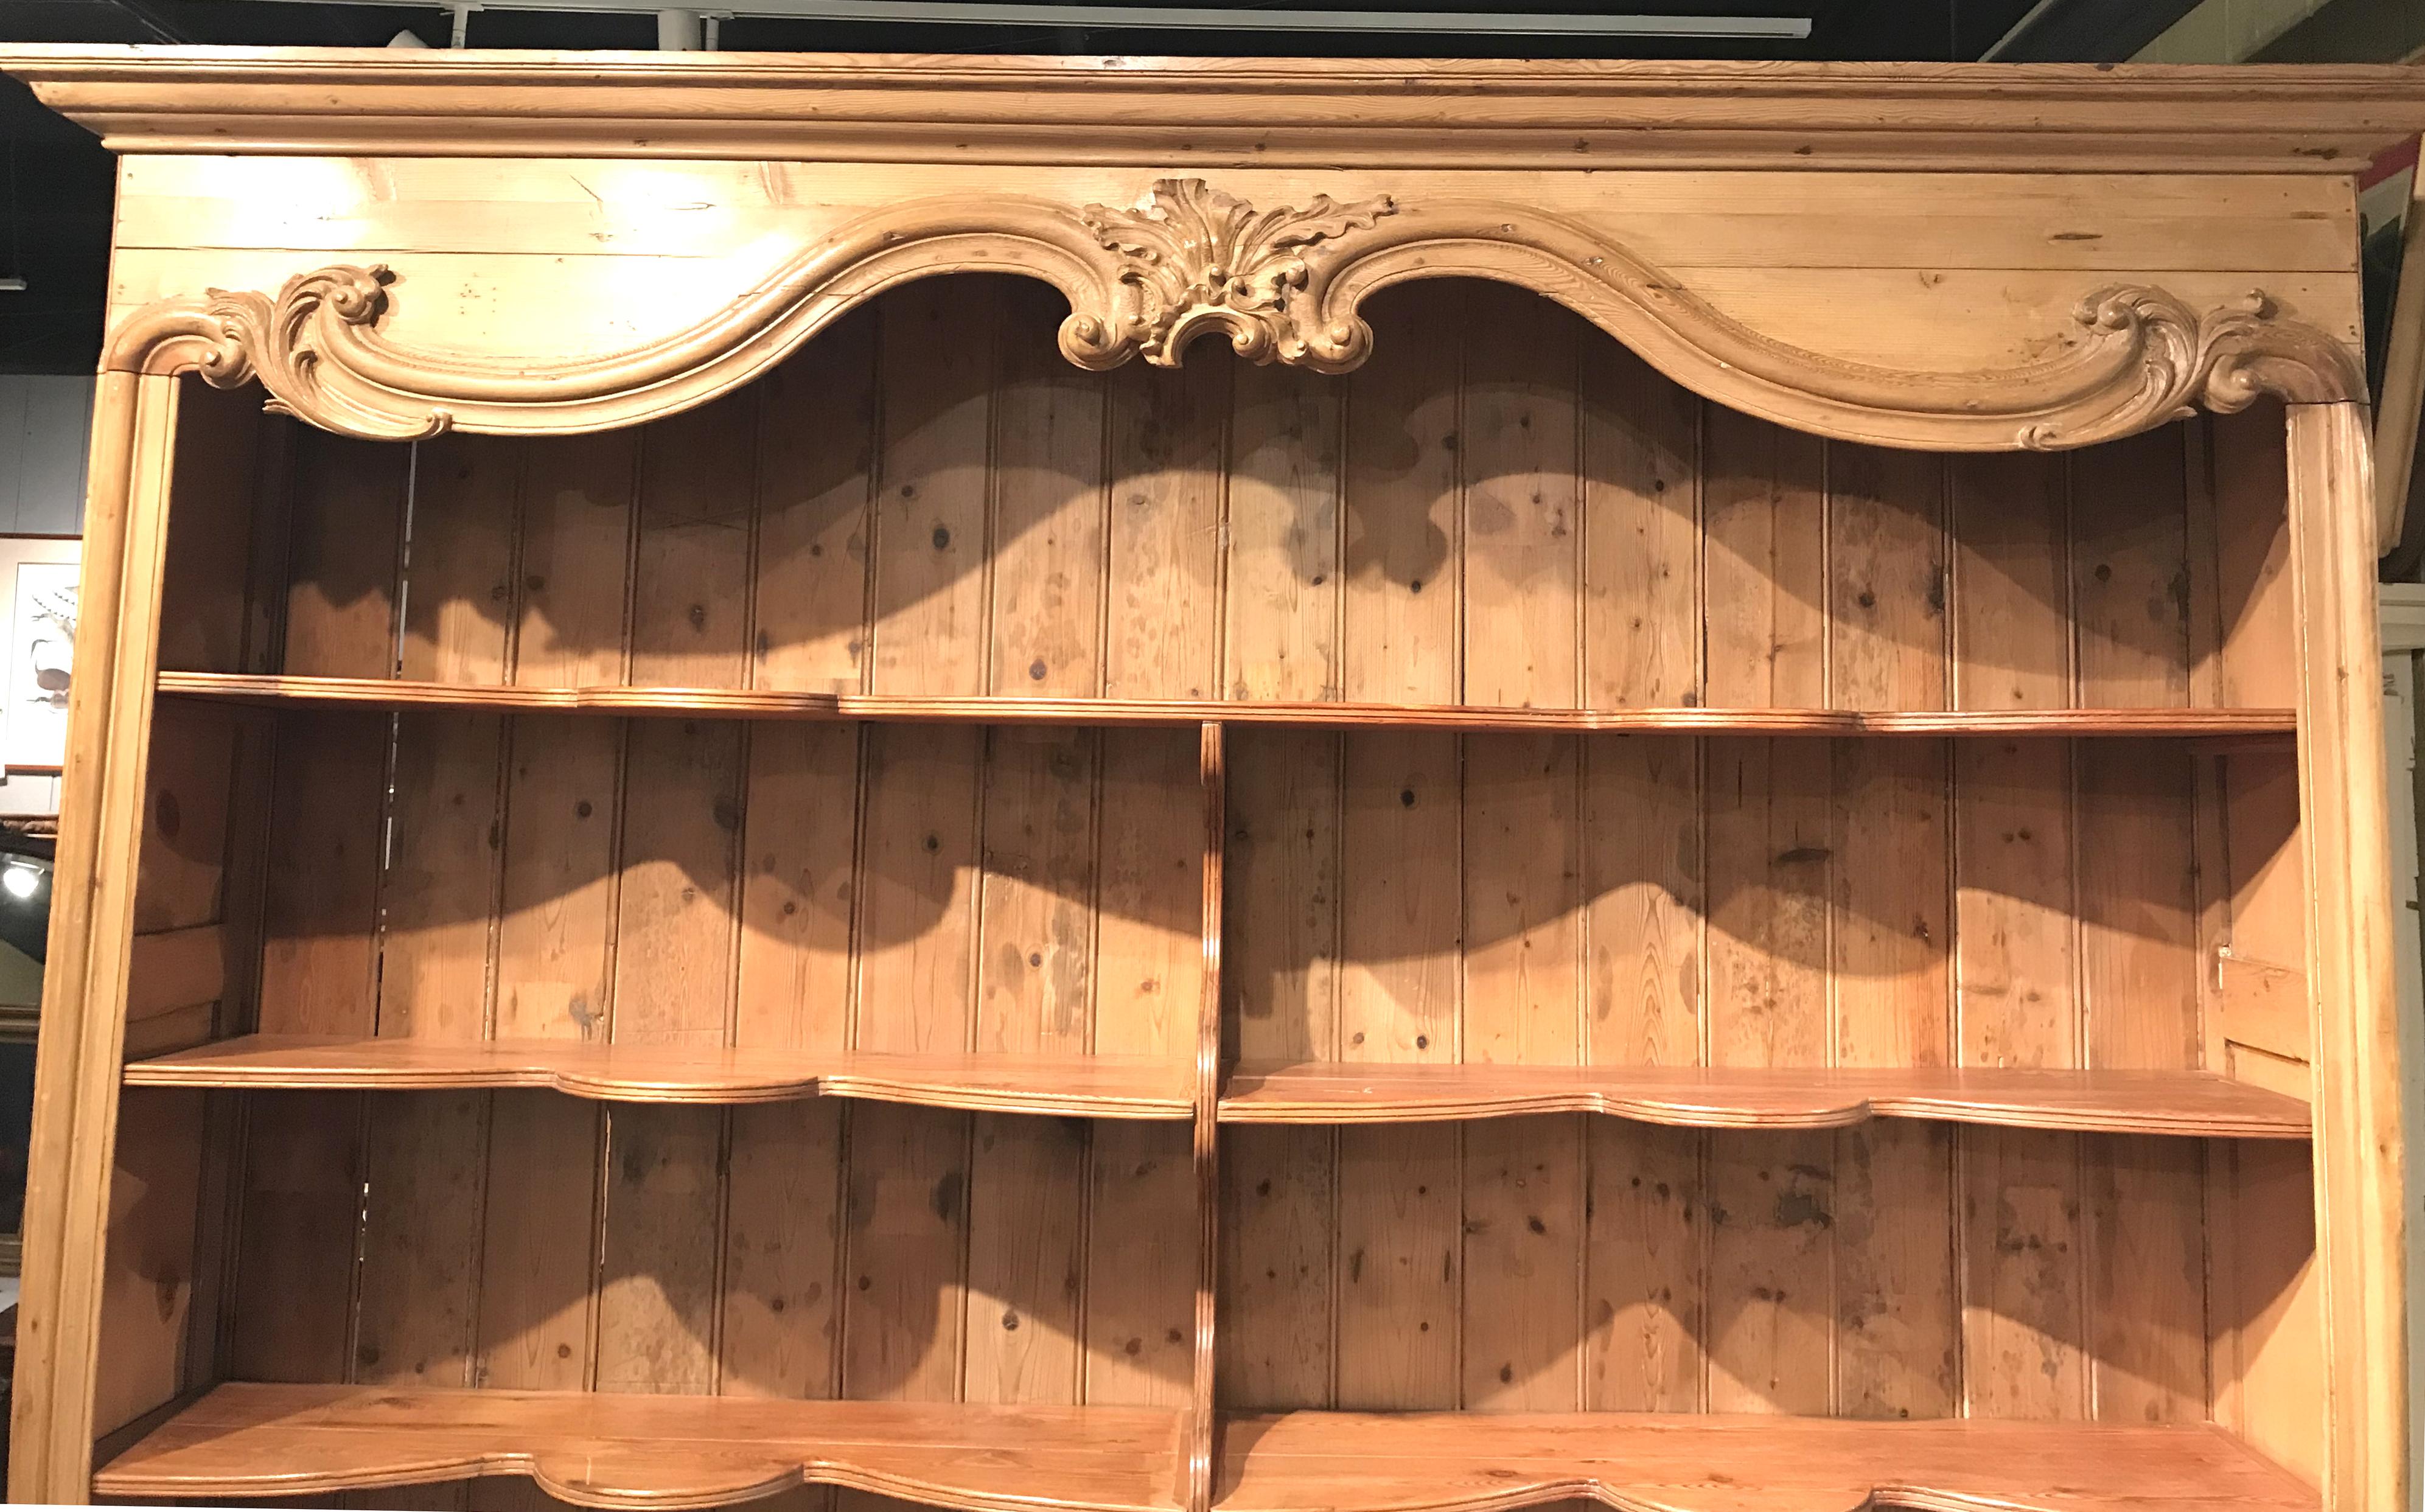 A monumental two part pine bookcase / hutch with foliate carved crest, C and S scroll and acanthus carved decoration, and paneled sides. Its upper case has open shaped shelves with a central divider, and a lower case with three paneled doors with